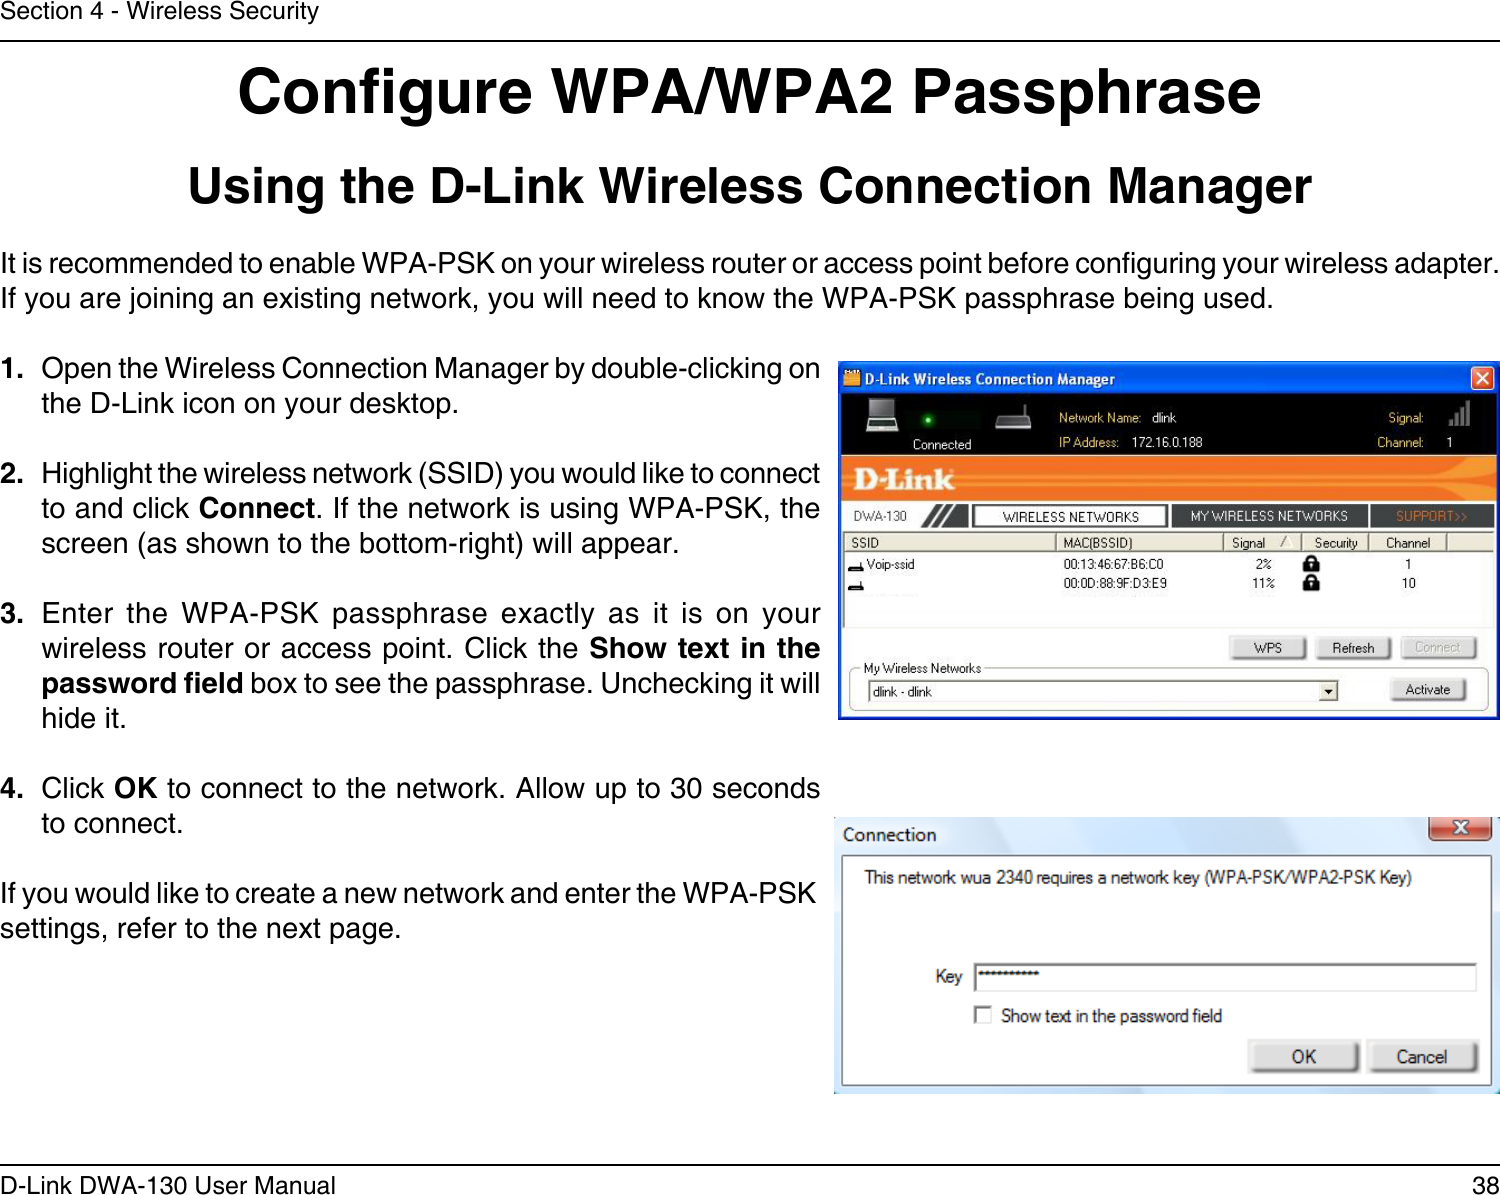 38D-Link DWA-130 User ManualSection 4 - Wireless SecurityCongure WPA/WPA2 PassphraseUsing the D-Link Wireless Connection ManagerIt is recommended to enable WPA-PSK on your wireless router or access point before conguring your wireless adapter. If you are joining an existing network, you will need to know the WPA-PSK passphrase being used.1.  Open the Wireless Connection Manager by double-clicking on the D-Link icon on your desktop. 2.  Highlight the wireless network (SSID) you would like to connect to and click Connect. If the network is using WPA-PSK, the screen (as shown to the bottom-right) will appear. 3.  Enter  the  WPA-PSK  passphrase  exactly  as  it  is  on  your wireless router or access point. Click the Show text in the password eld box to see the passphrase. Unchecking it will hide it.4.  Click OK to connect to the network. Allow up to 30 seconds to connect.If you would like to create a new network and enter the WPA-PSK settings, refer to the next page.